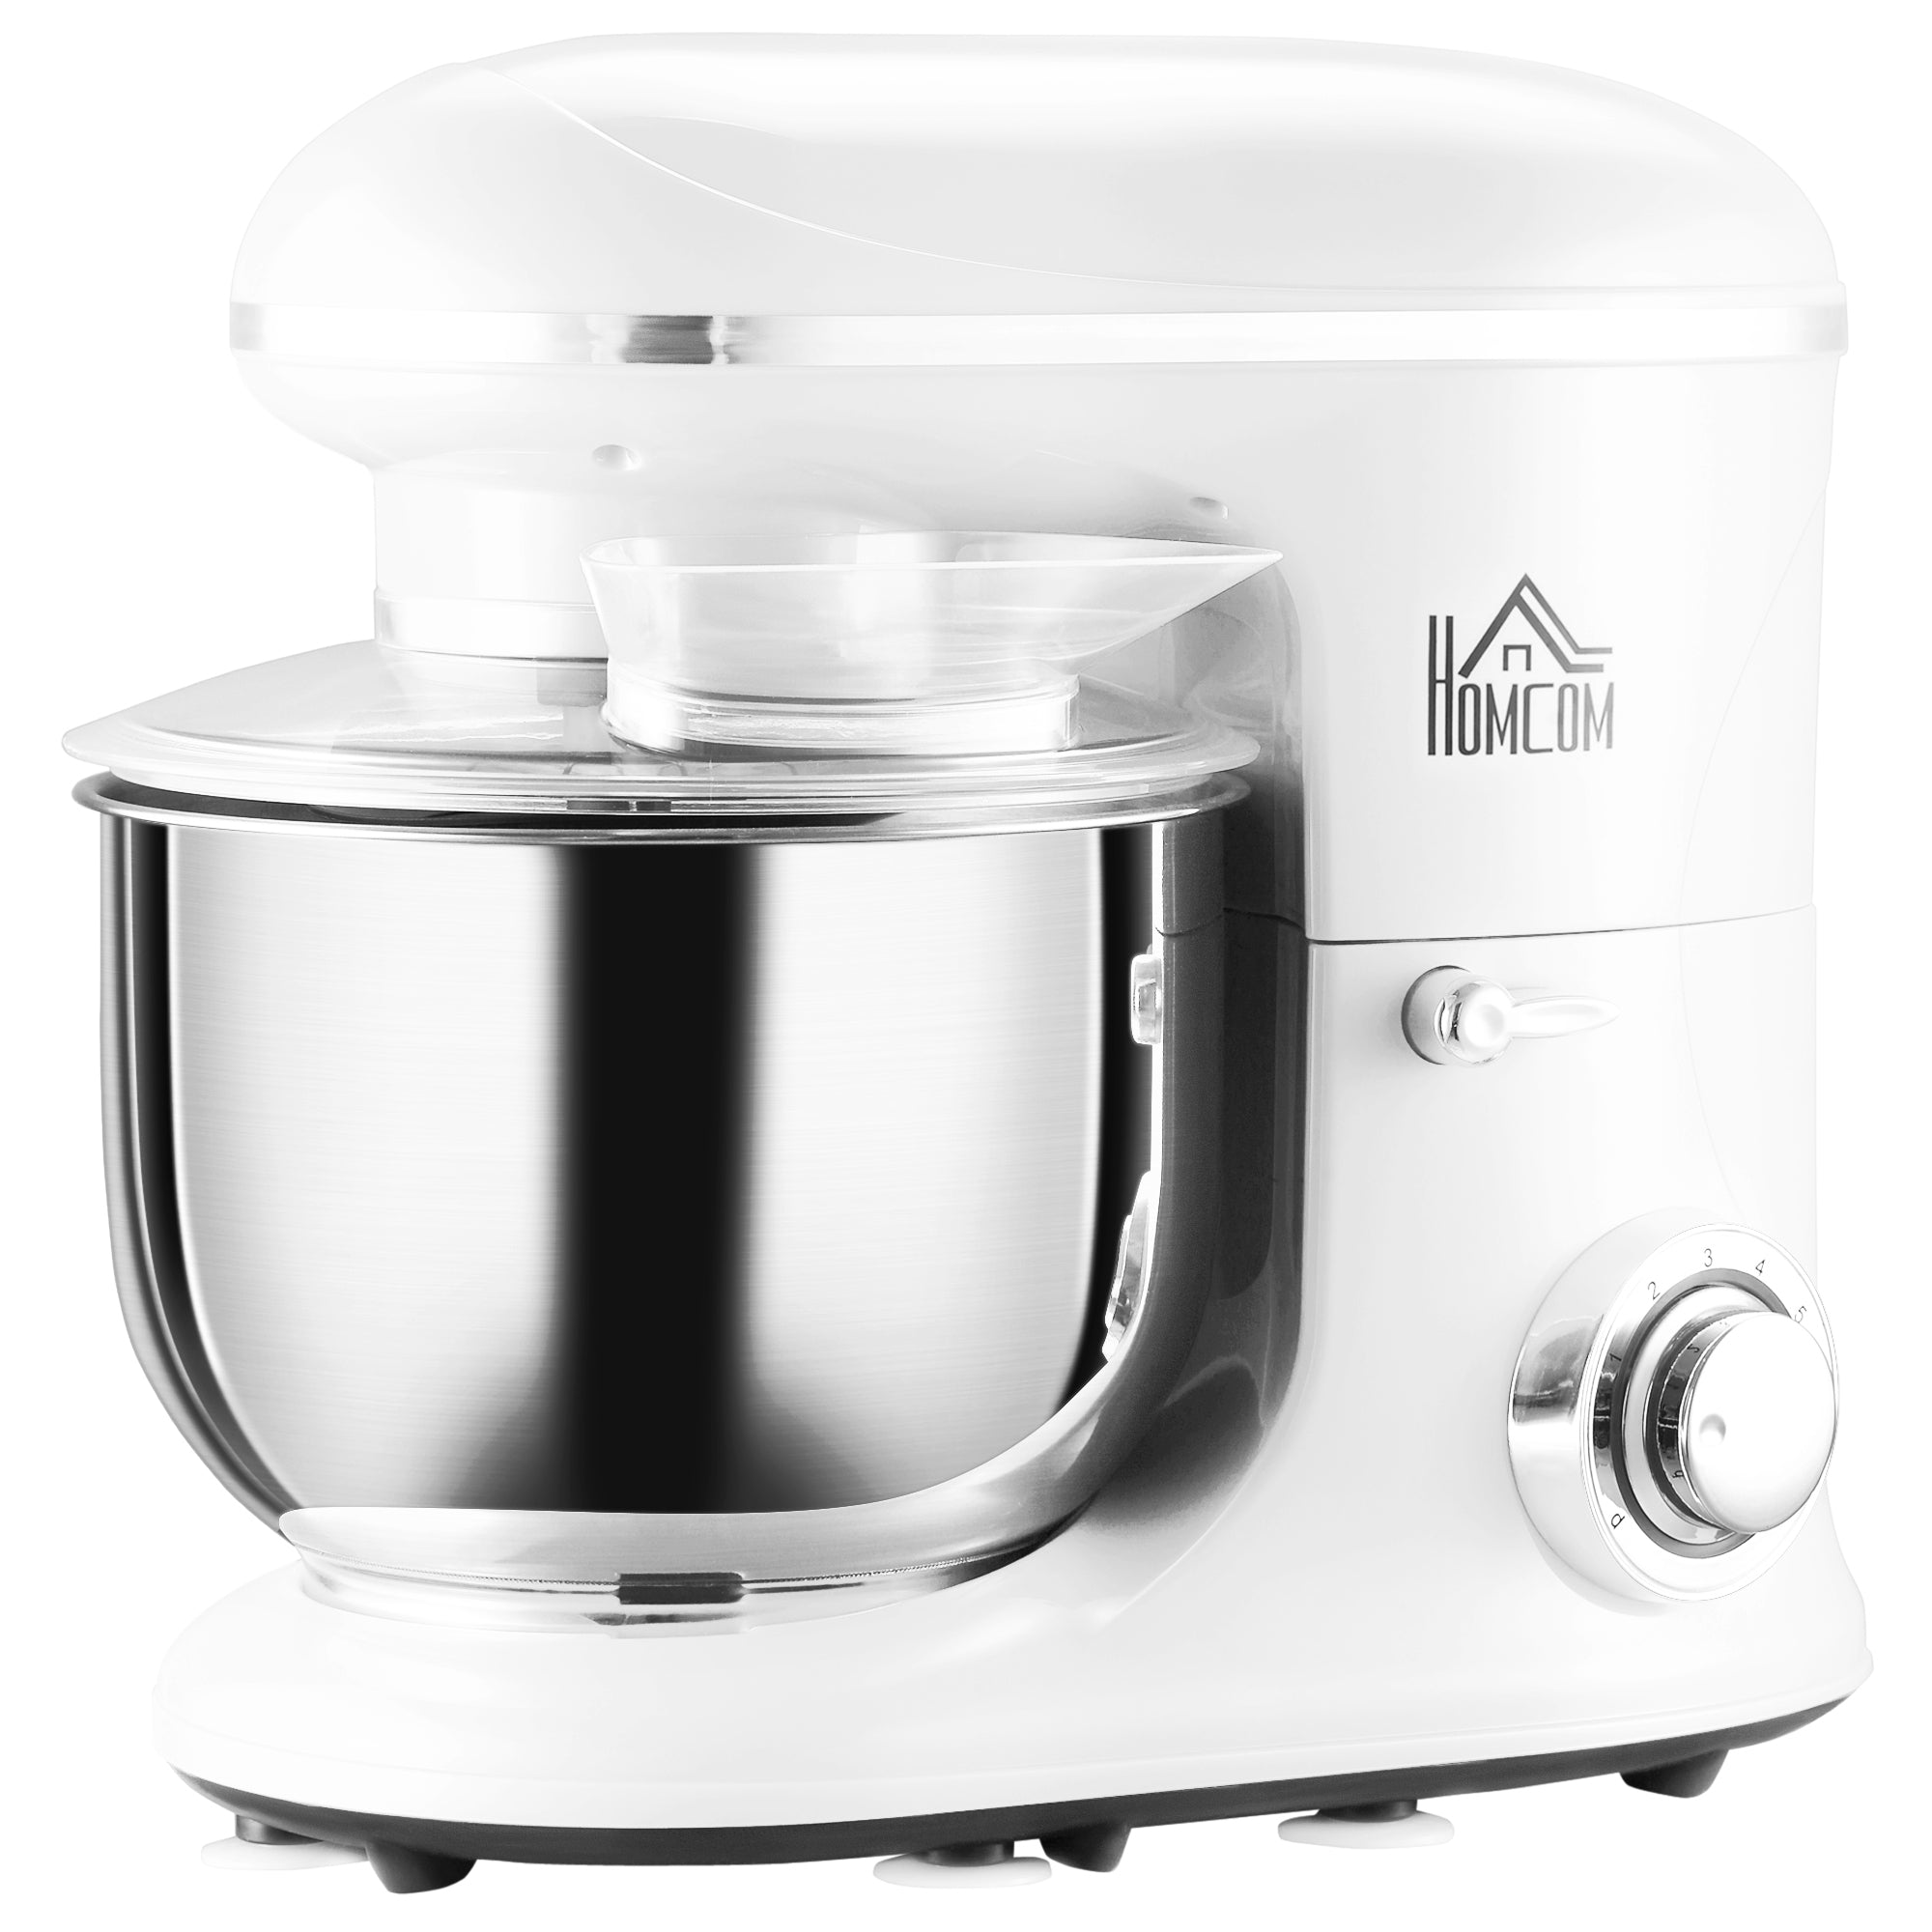 Stand-Mixer-with-6+1P-Speed,-600W-Tilt-Head-Kitchen-Electric-Mixer-with-6-Qt-Stainless-Steel-Mixing-Bowl,-Beater,-Dough-Hook,-White-kitchen-appliance